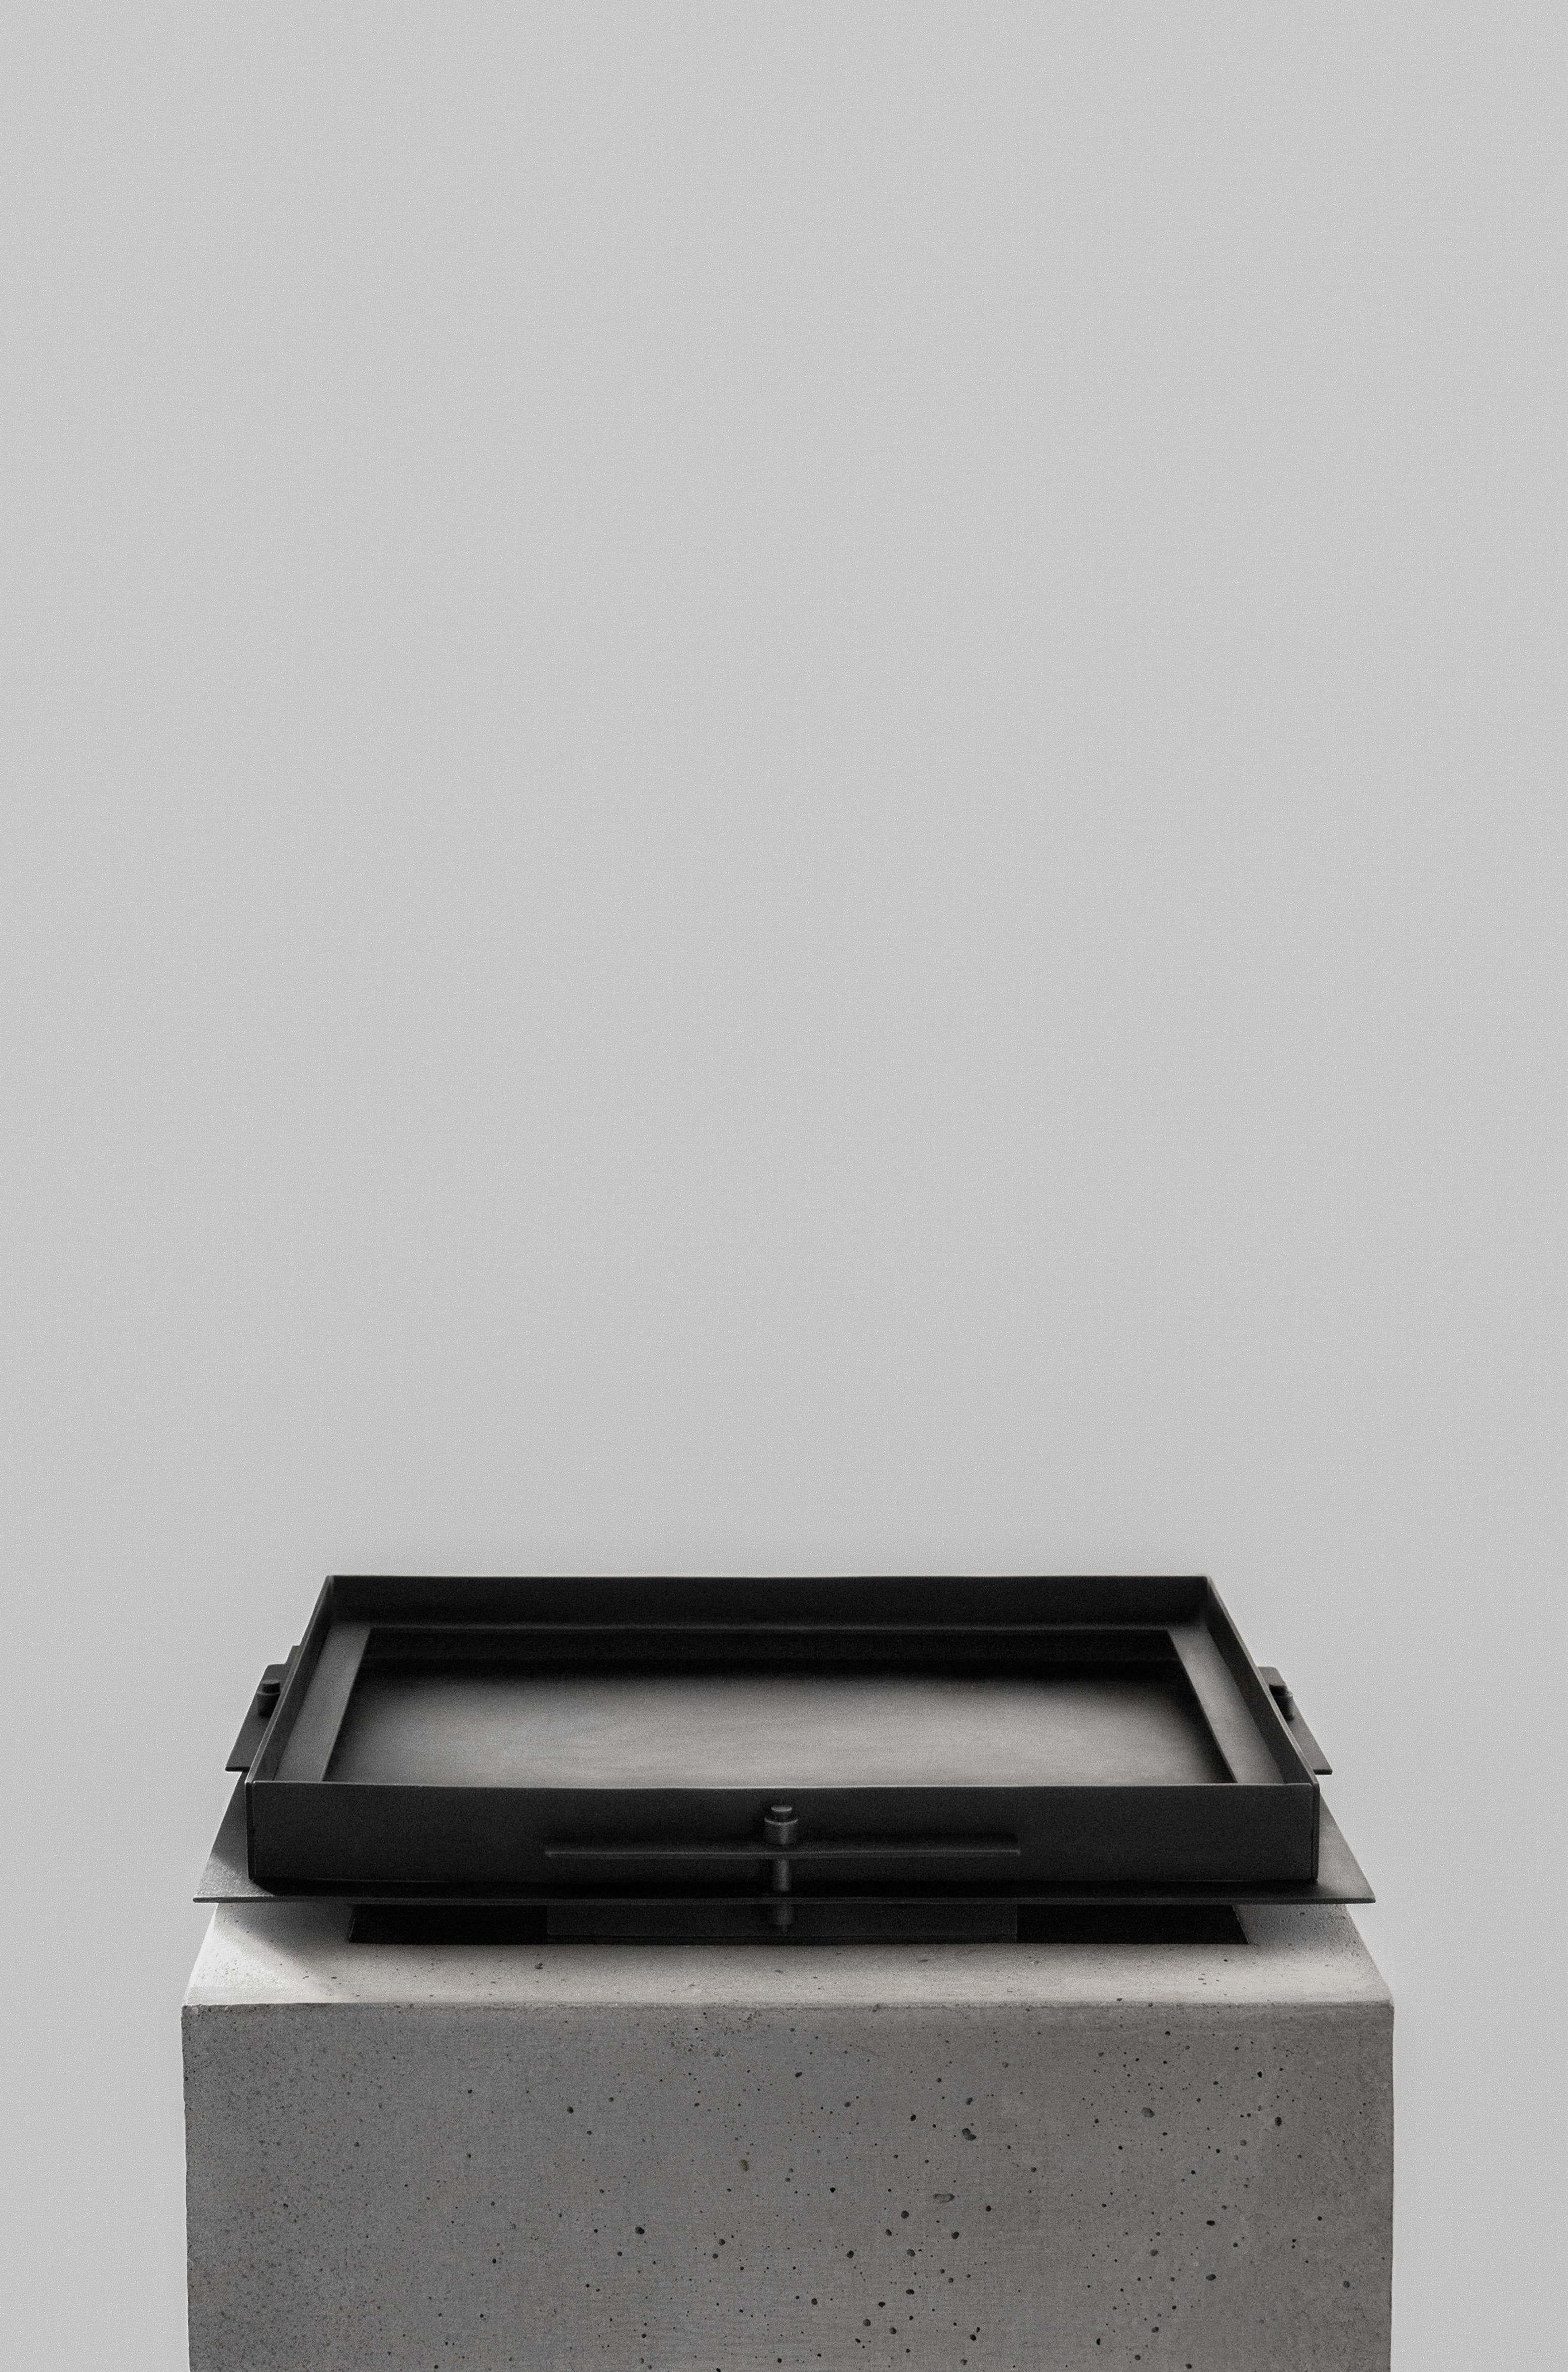 Pilier steel tray by Sizar Alexis
Unique signed piece
Dimensions: Length 35 x width 28 x height 4.5 cm
Materials: Blackened steel, ox leather

A series of boldly sculpted furnitures and objects, an
appreciation of the raw metal feel and